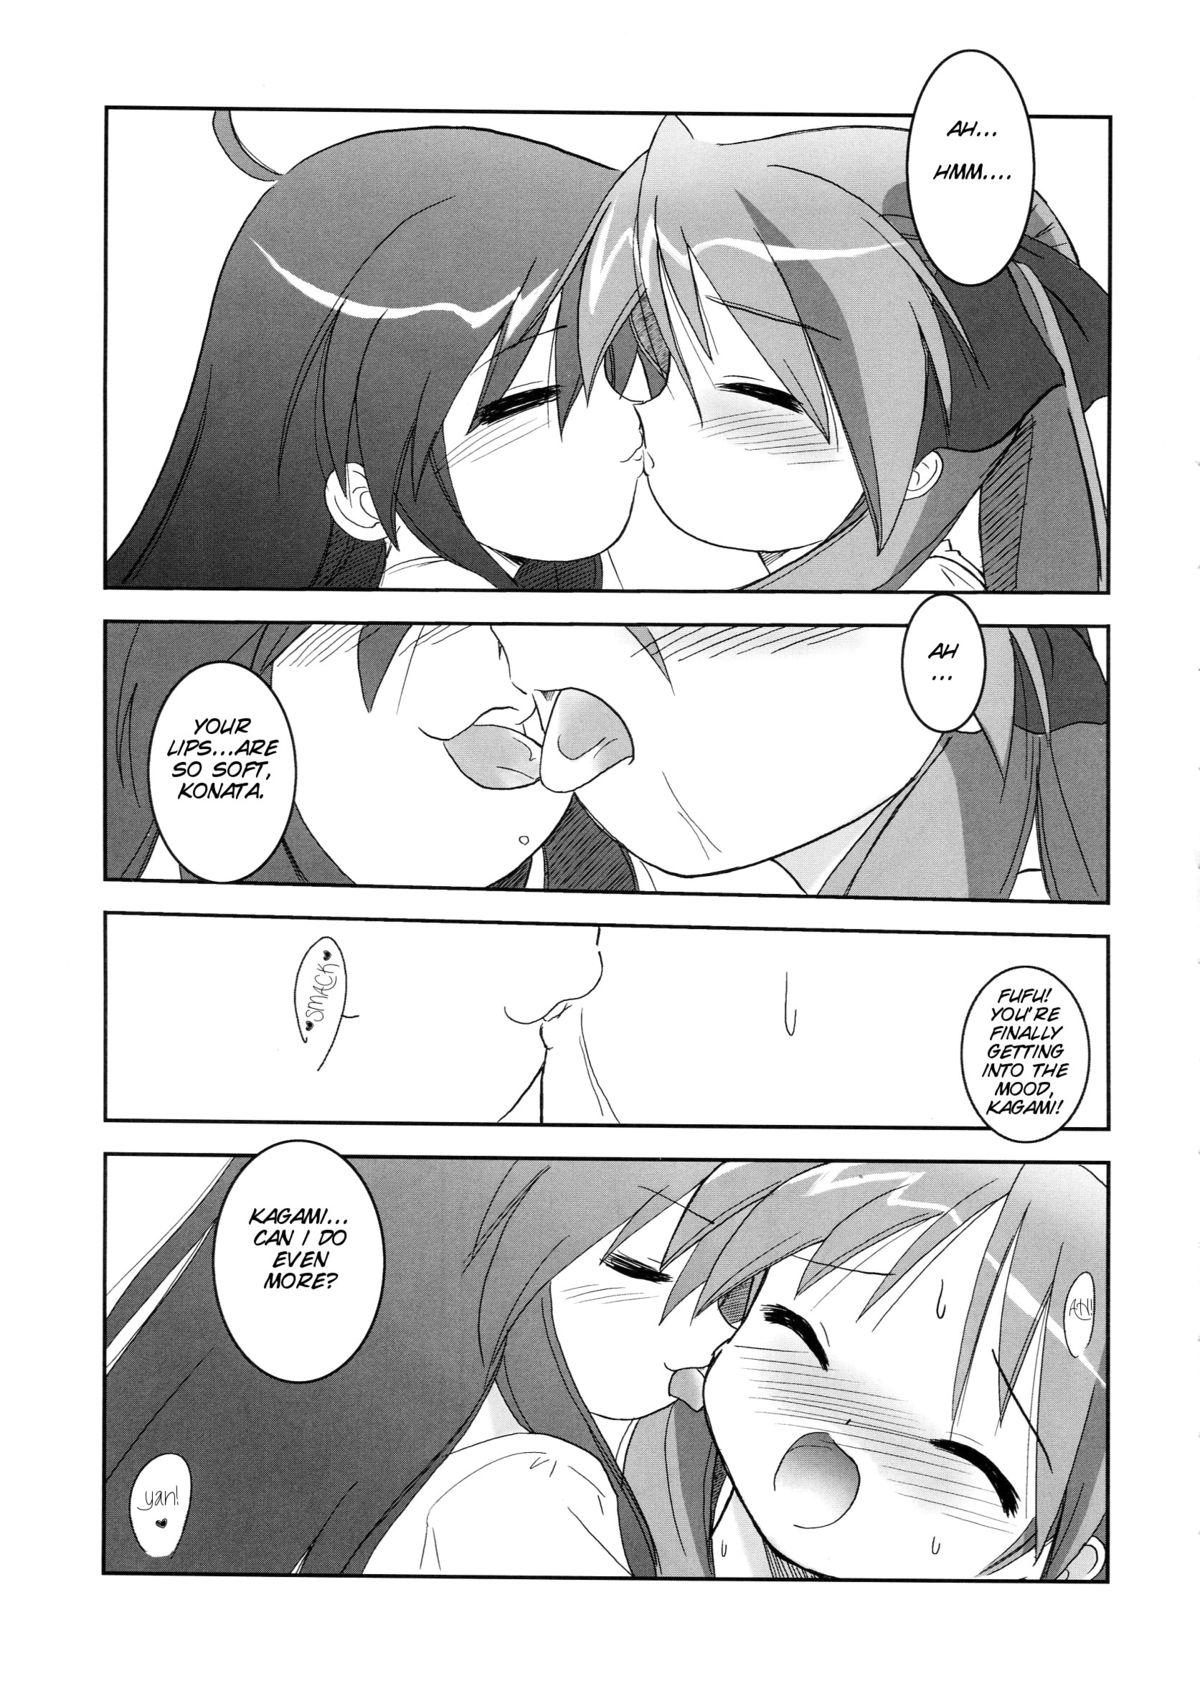 Price HK4 - Lucky star Indoor - Page 8